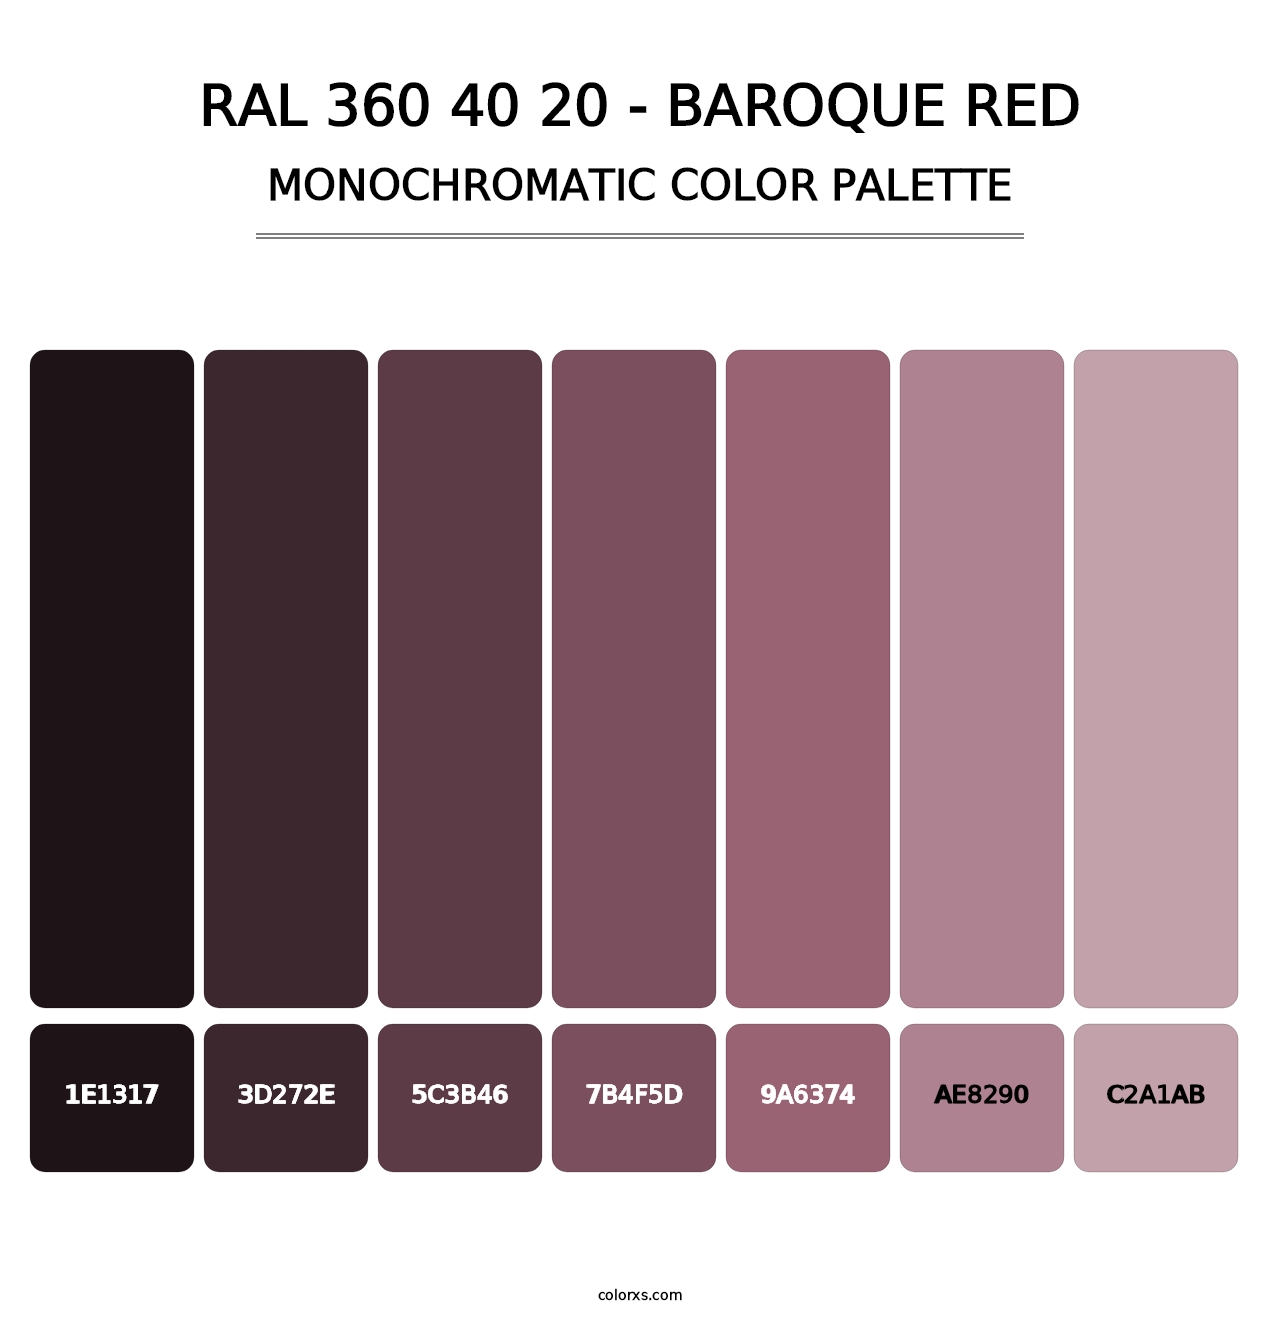 RAL 360 40 20 - Baroque Red - Monochromatic Color Palette